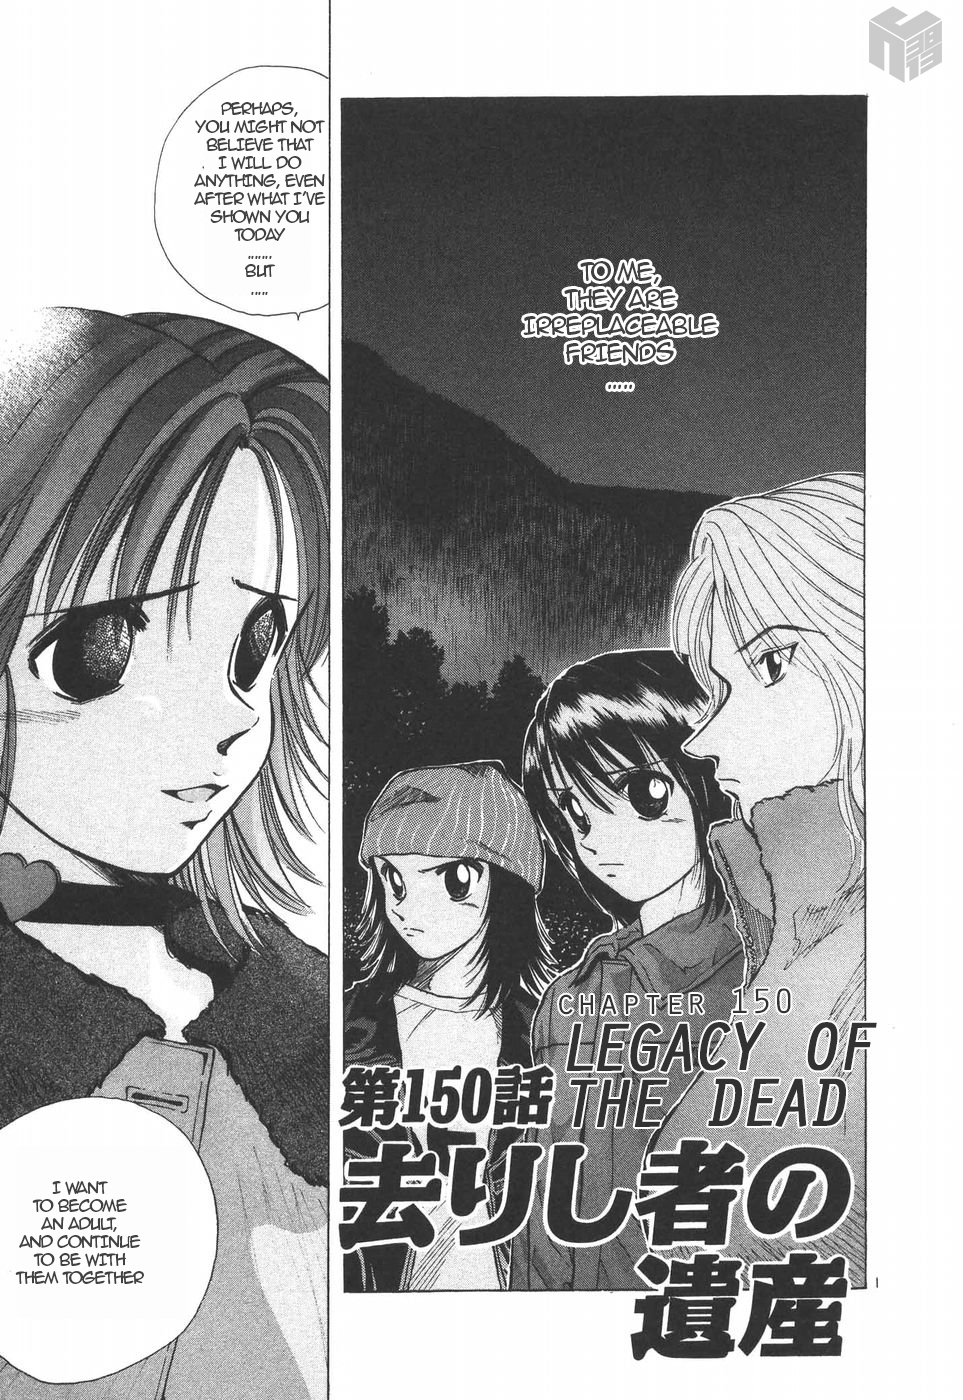 Over Rev! Vol. 14 Ch. 150 Legacy of the Dead